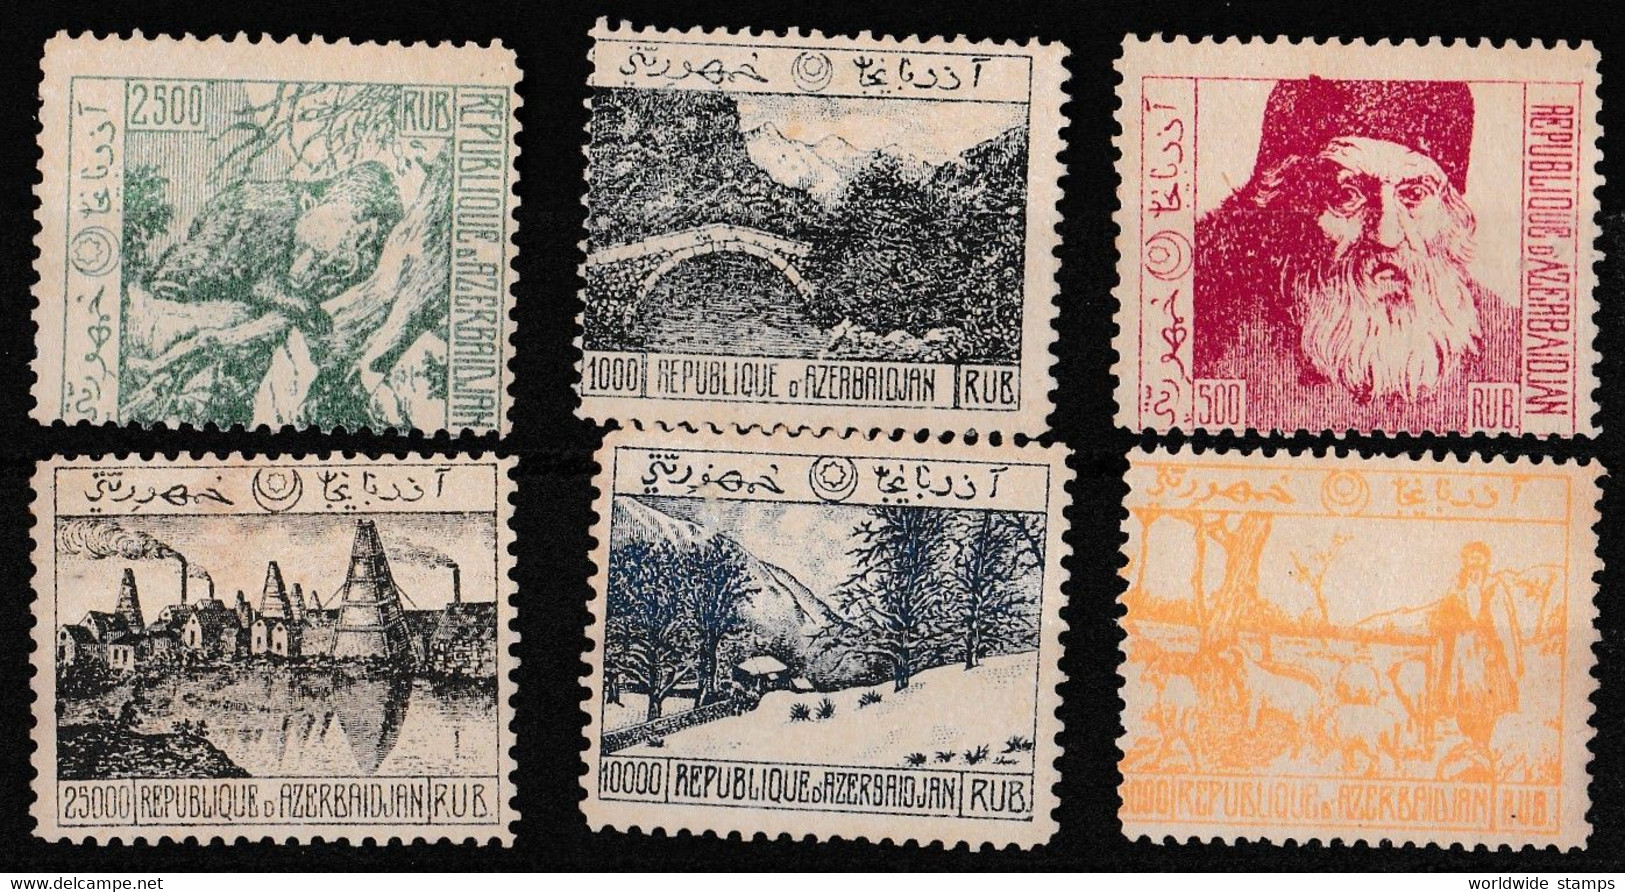 1923 AZERBAIJAN PRIVATE ISSUE PRINTED IN ITALY UDINE - RARE OLD SET,  Cinderella Fantasy Issue. - Aserbaidschan